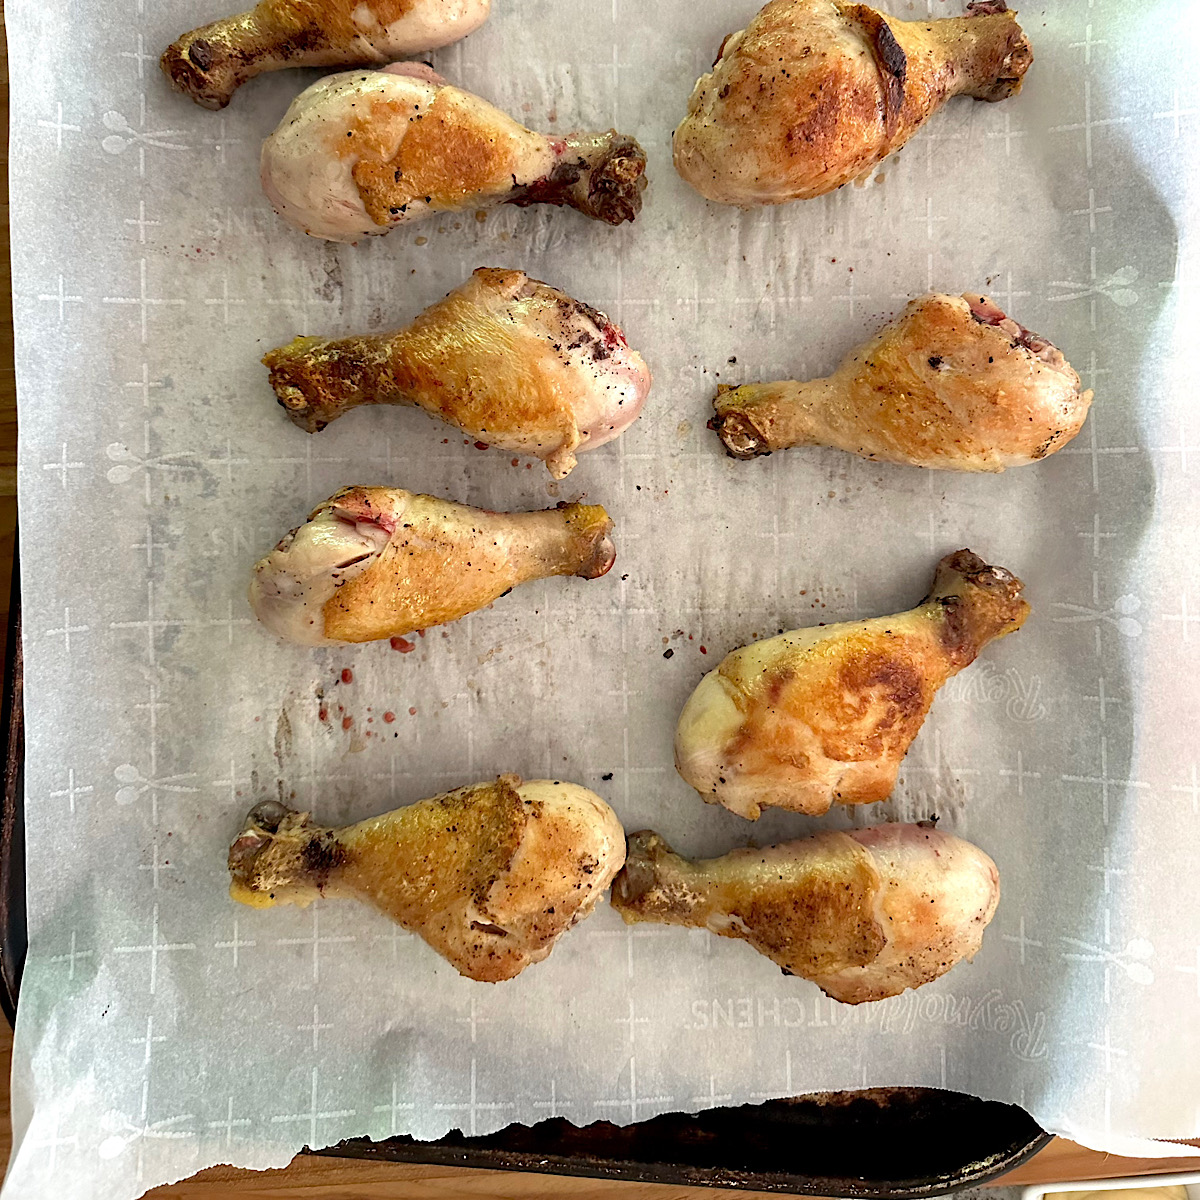 Chicken legs on baking sheet coated with mustard and low carb breading.